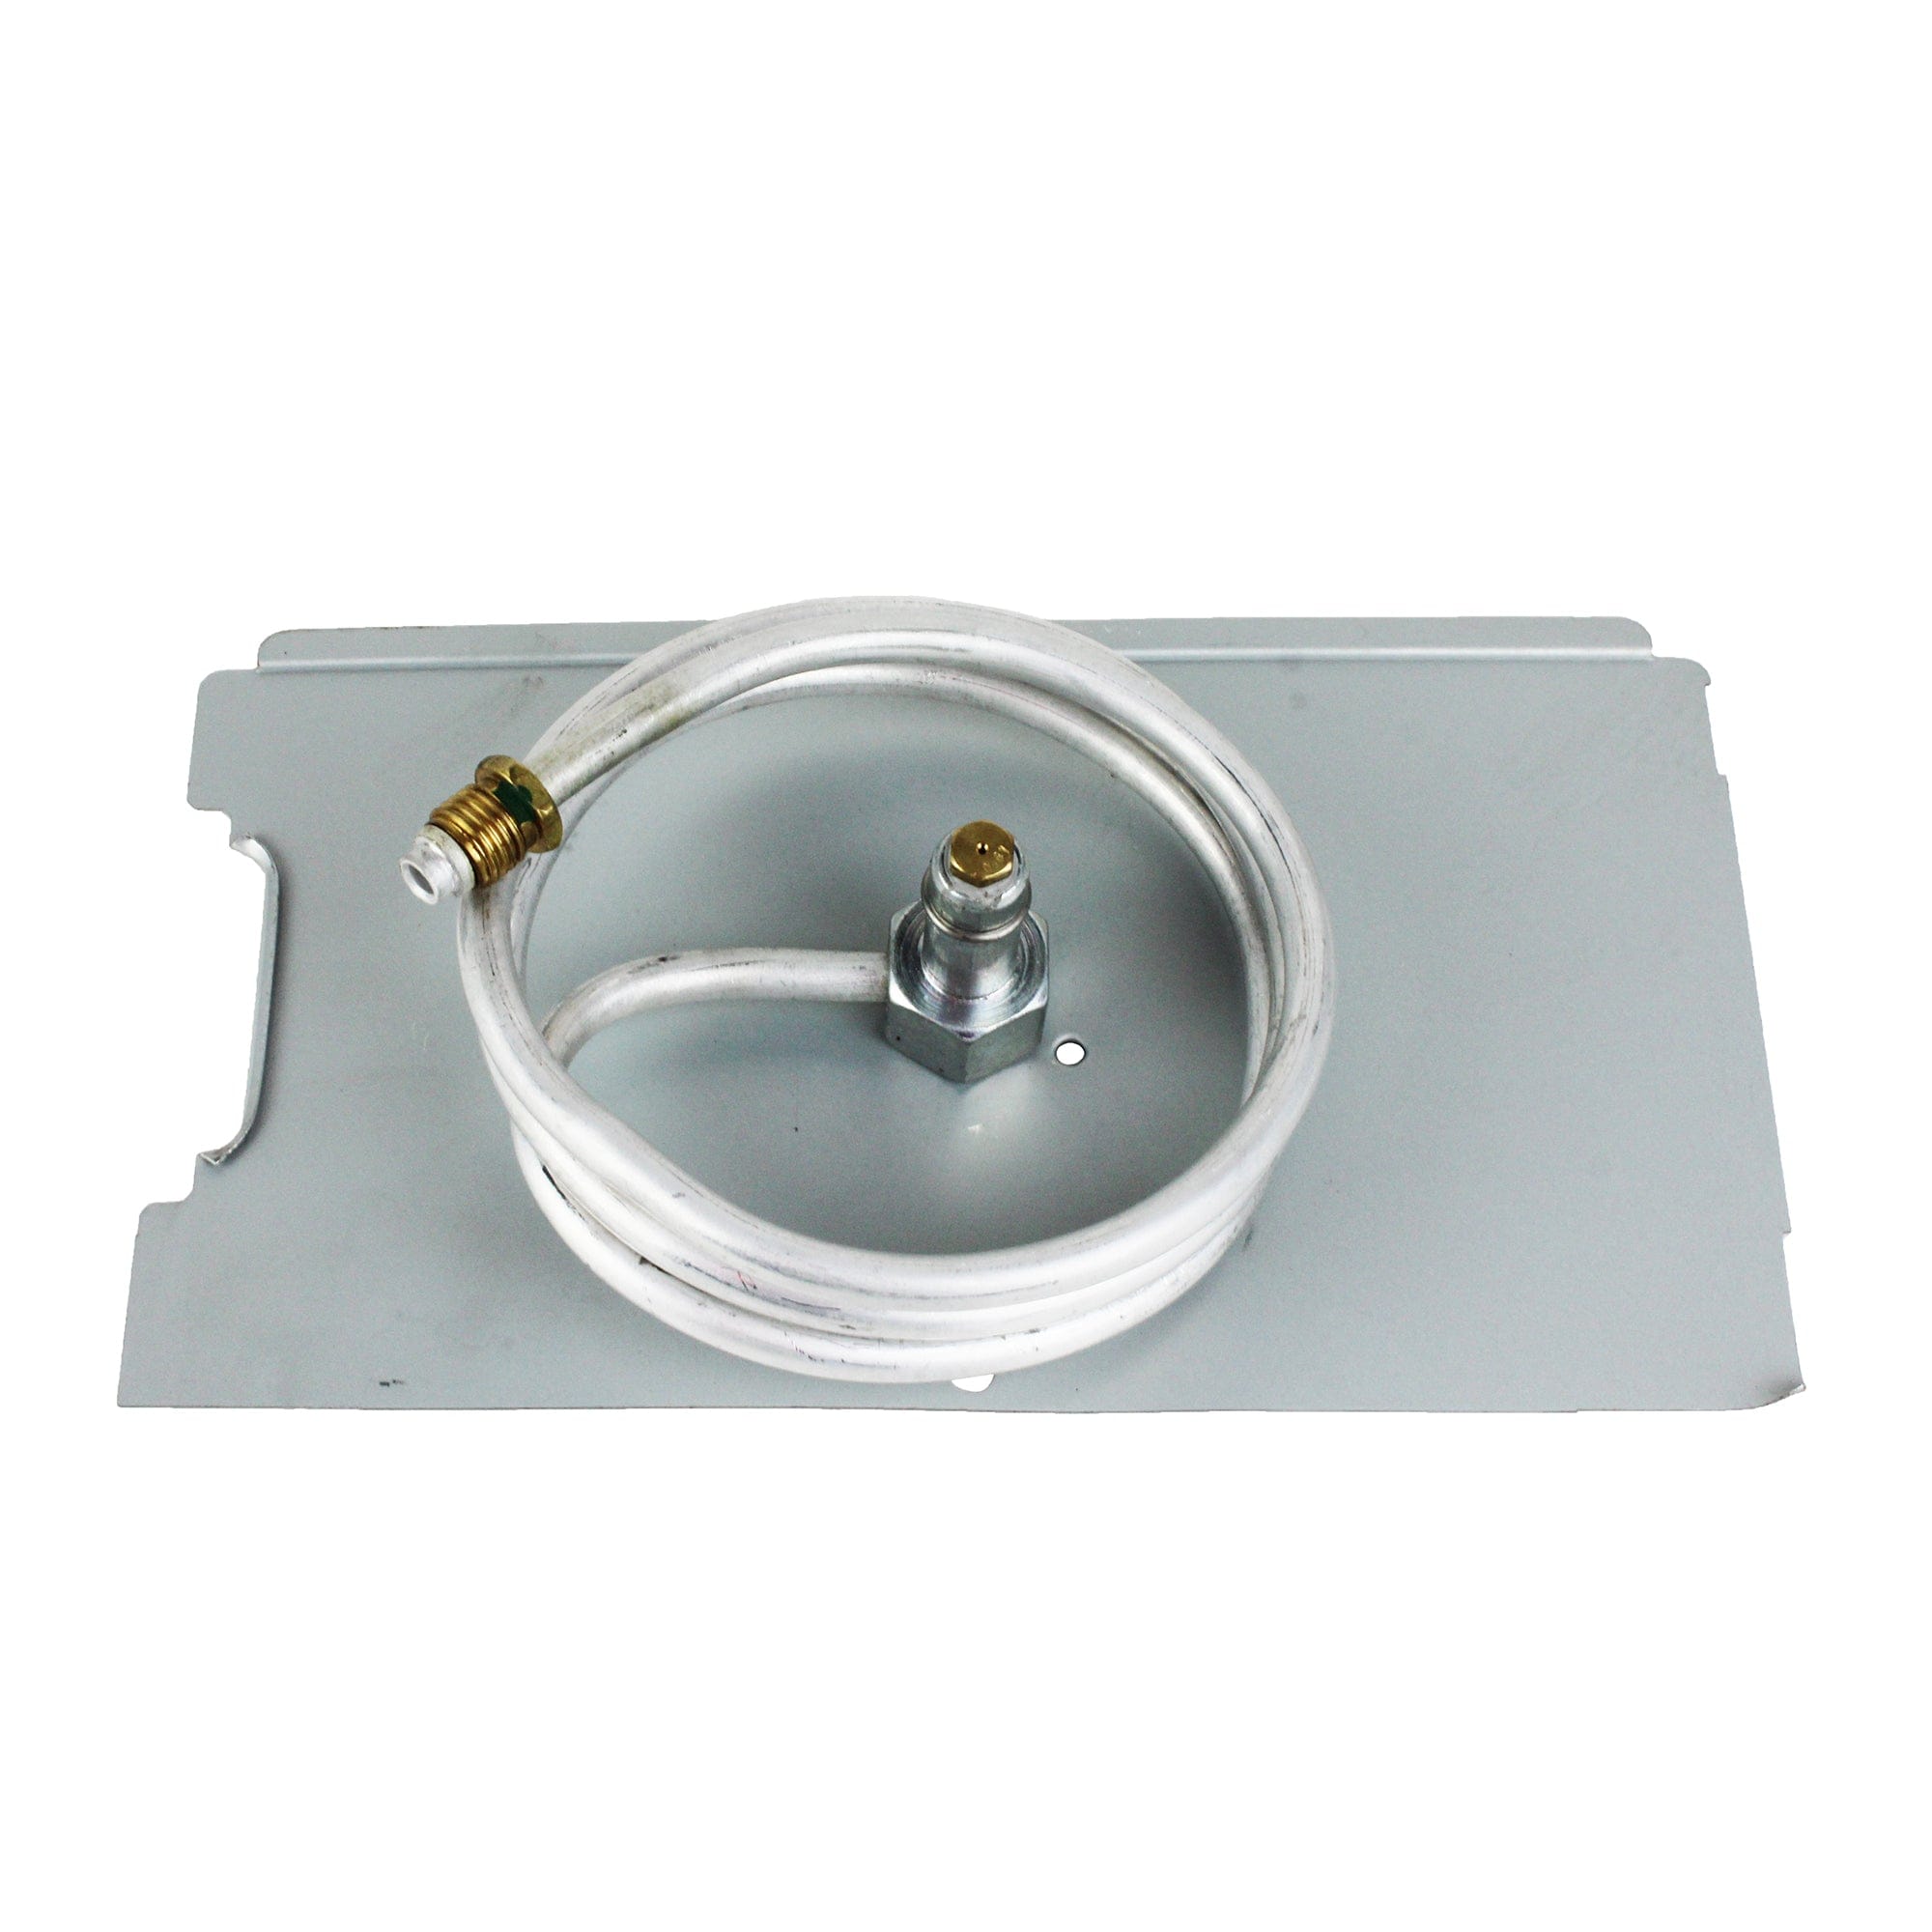 Dometic 52704 Oven Gas Supply Assembly